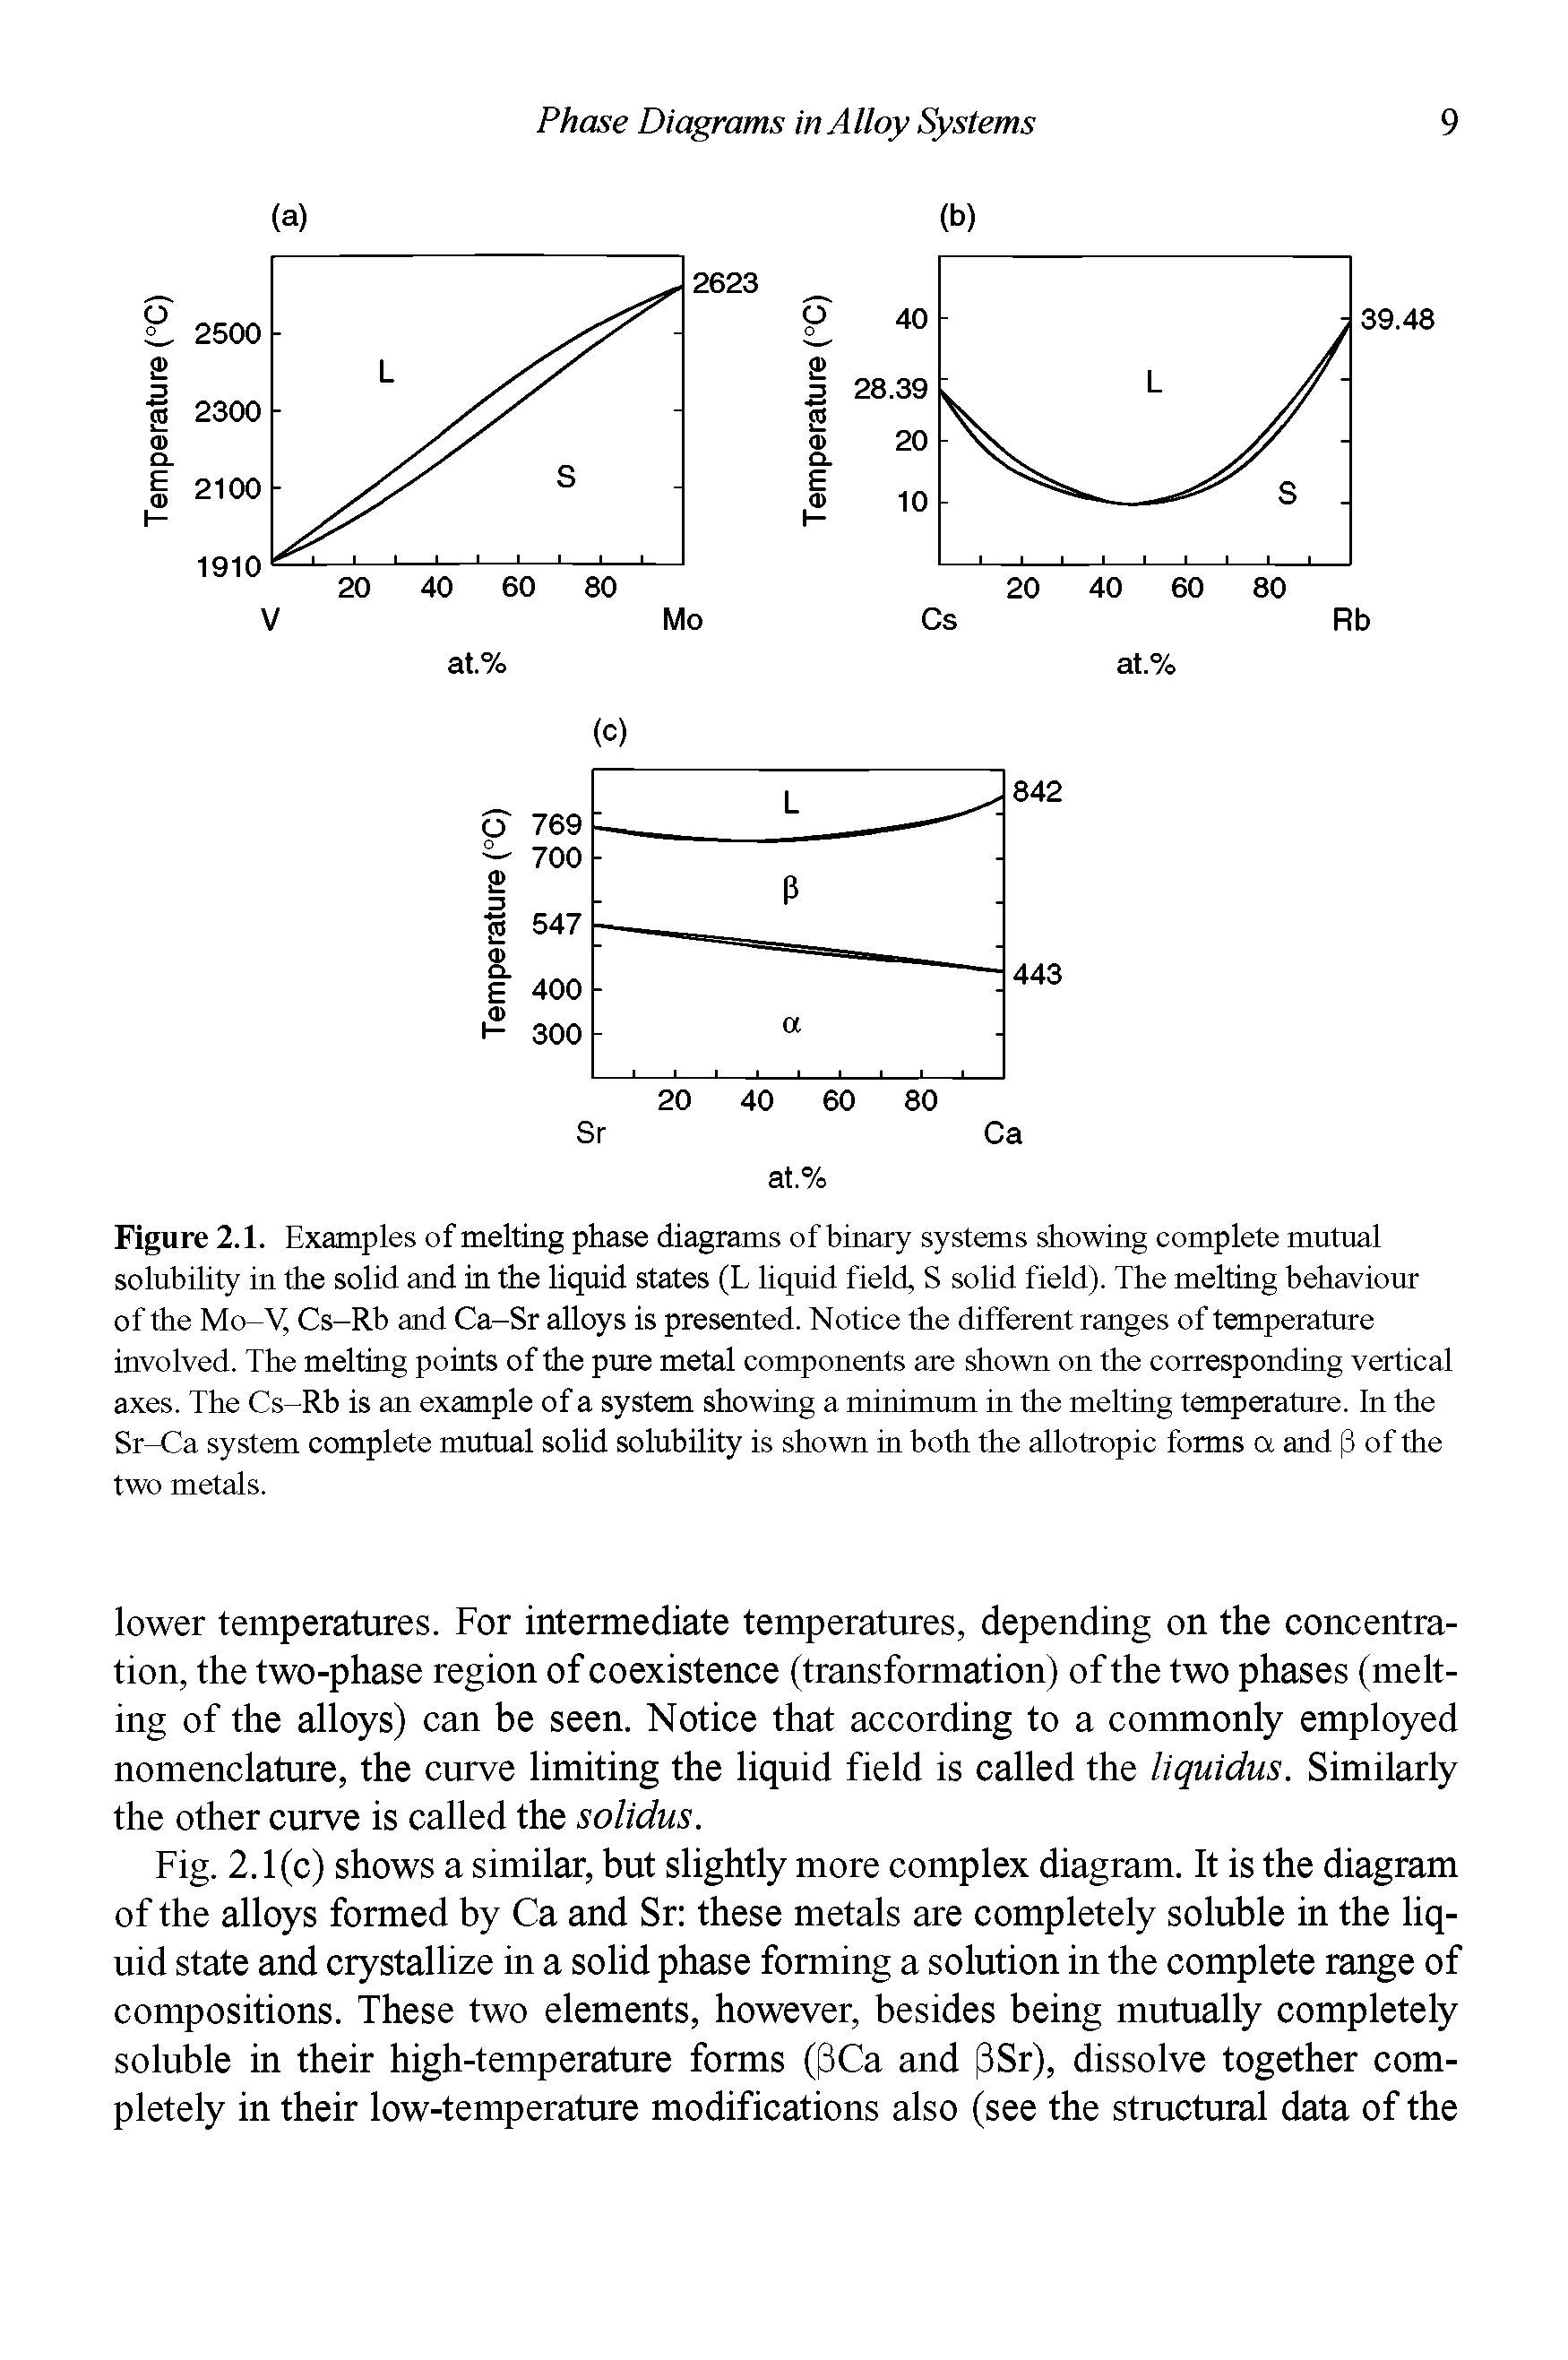 Figure 2.1. Examples of melting phase diagrams of binary systems showing complete mutual solubility in the solid and in the liquid states (L liquid field, S solid field). The melting behaviour of the Mo-V, Cs-Rb and Ca-Sr alloys is presented. Notice the different ranges of temperature involved. The melting points of the pure metal components are shown on the corresponding vertical axes. The Cs-Rb is an example of a system showing a minimum in the melting temperature. In the Sr-Ca system complete mutual solid solubility is shown in both the allotropic forms a and (3 of the two metals.